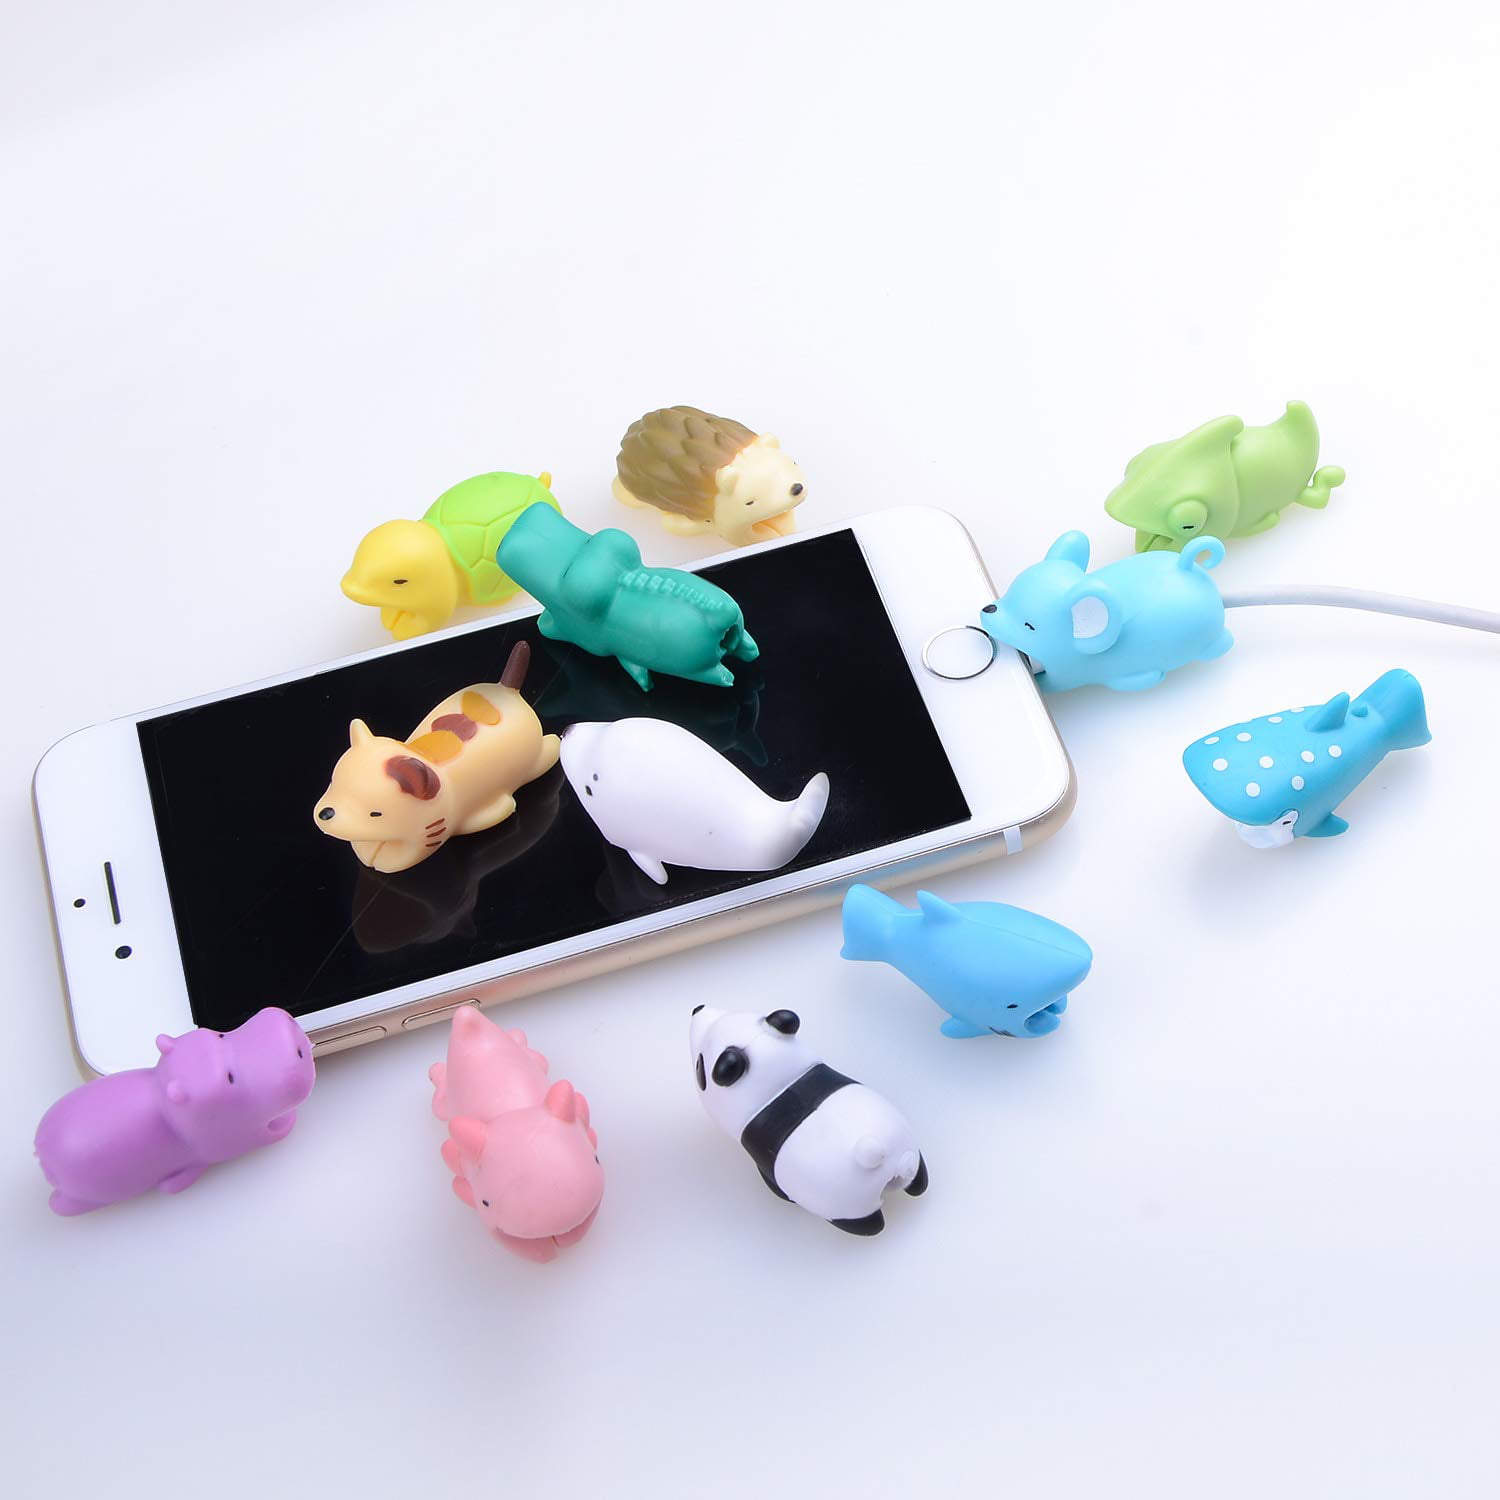 Various Animal Cable Chompers Cable Chewers Cable Accessories Phone Cables Protects Kalolary 12 Pack Cute Animals Cable Bites